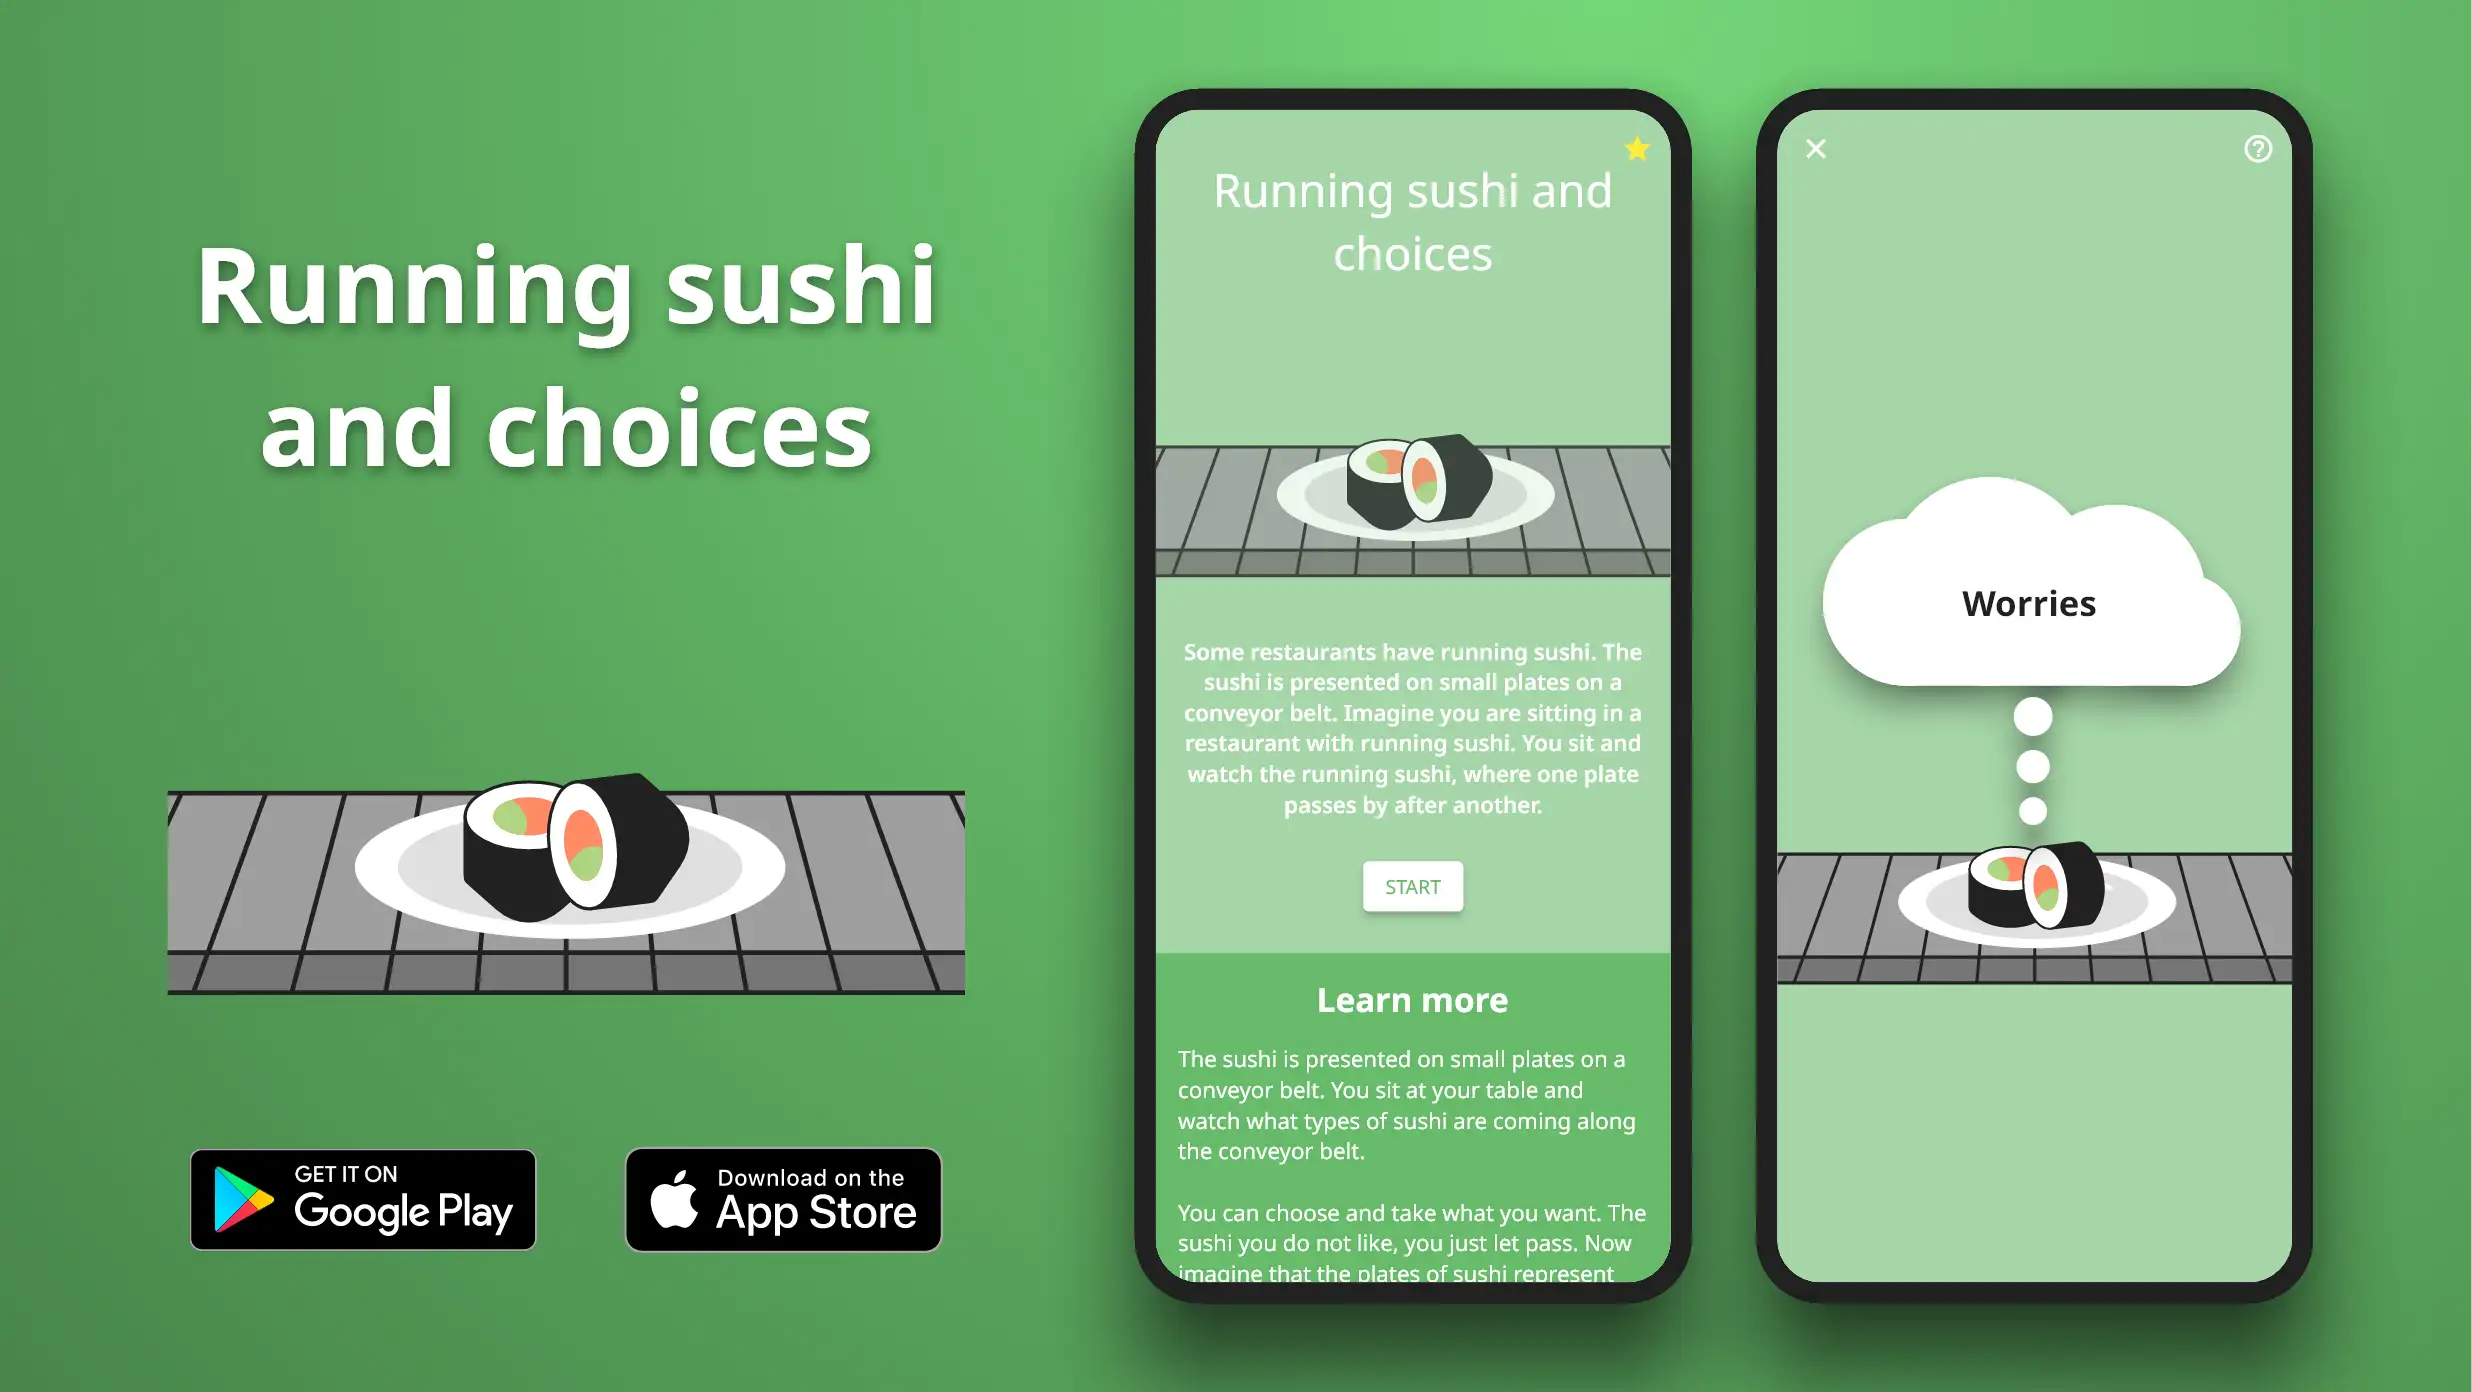 Running sushi and choices exercise in the Meta Learn App.